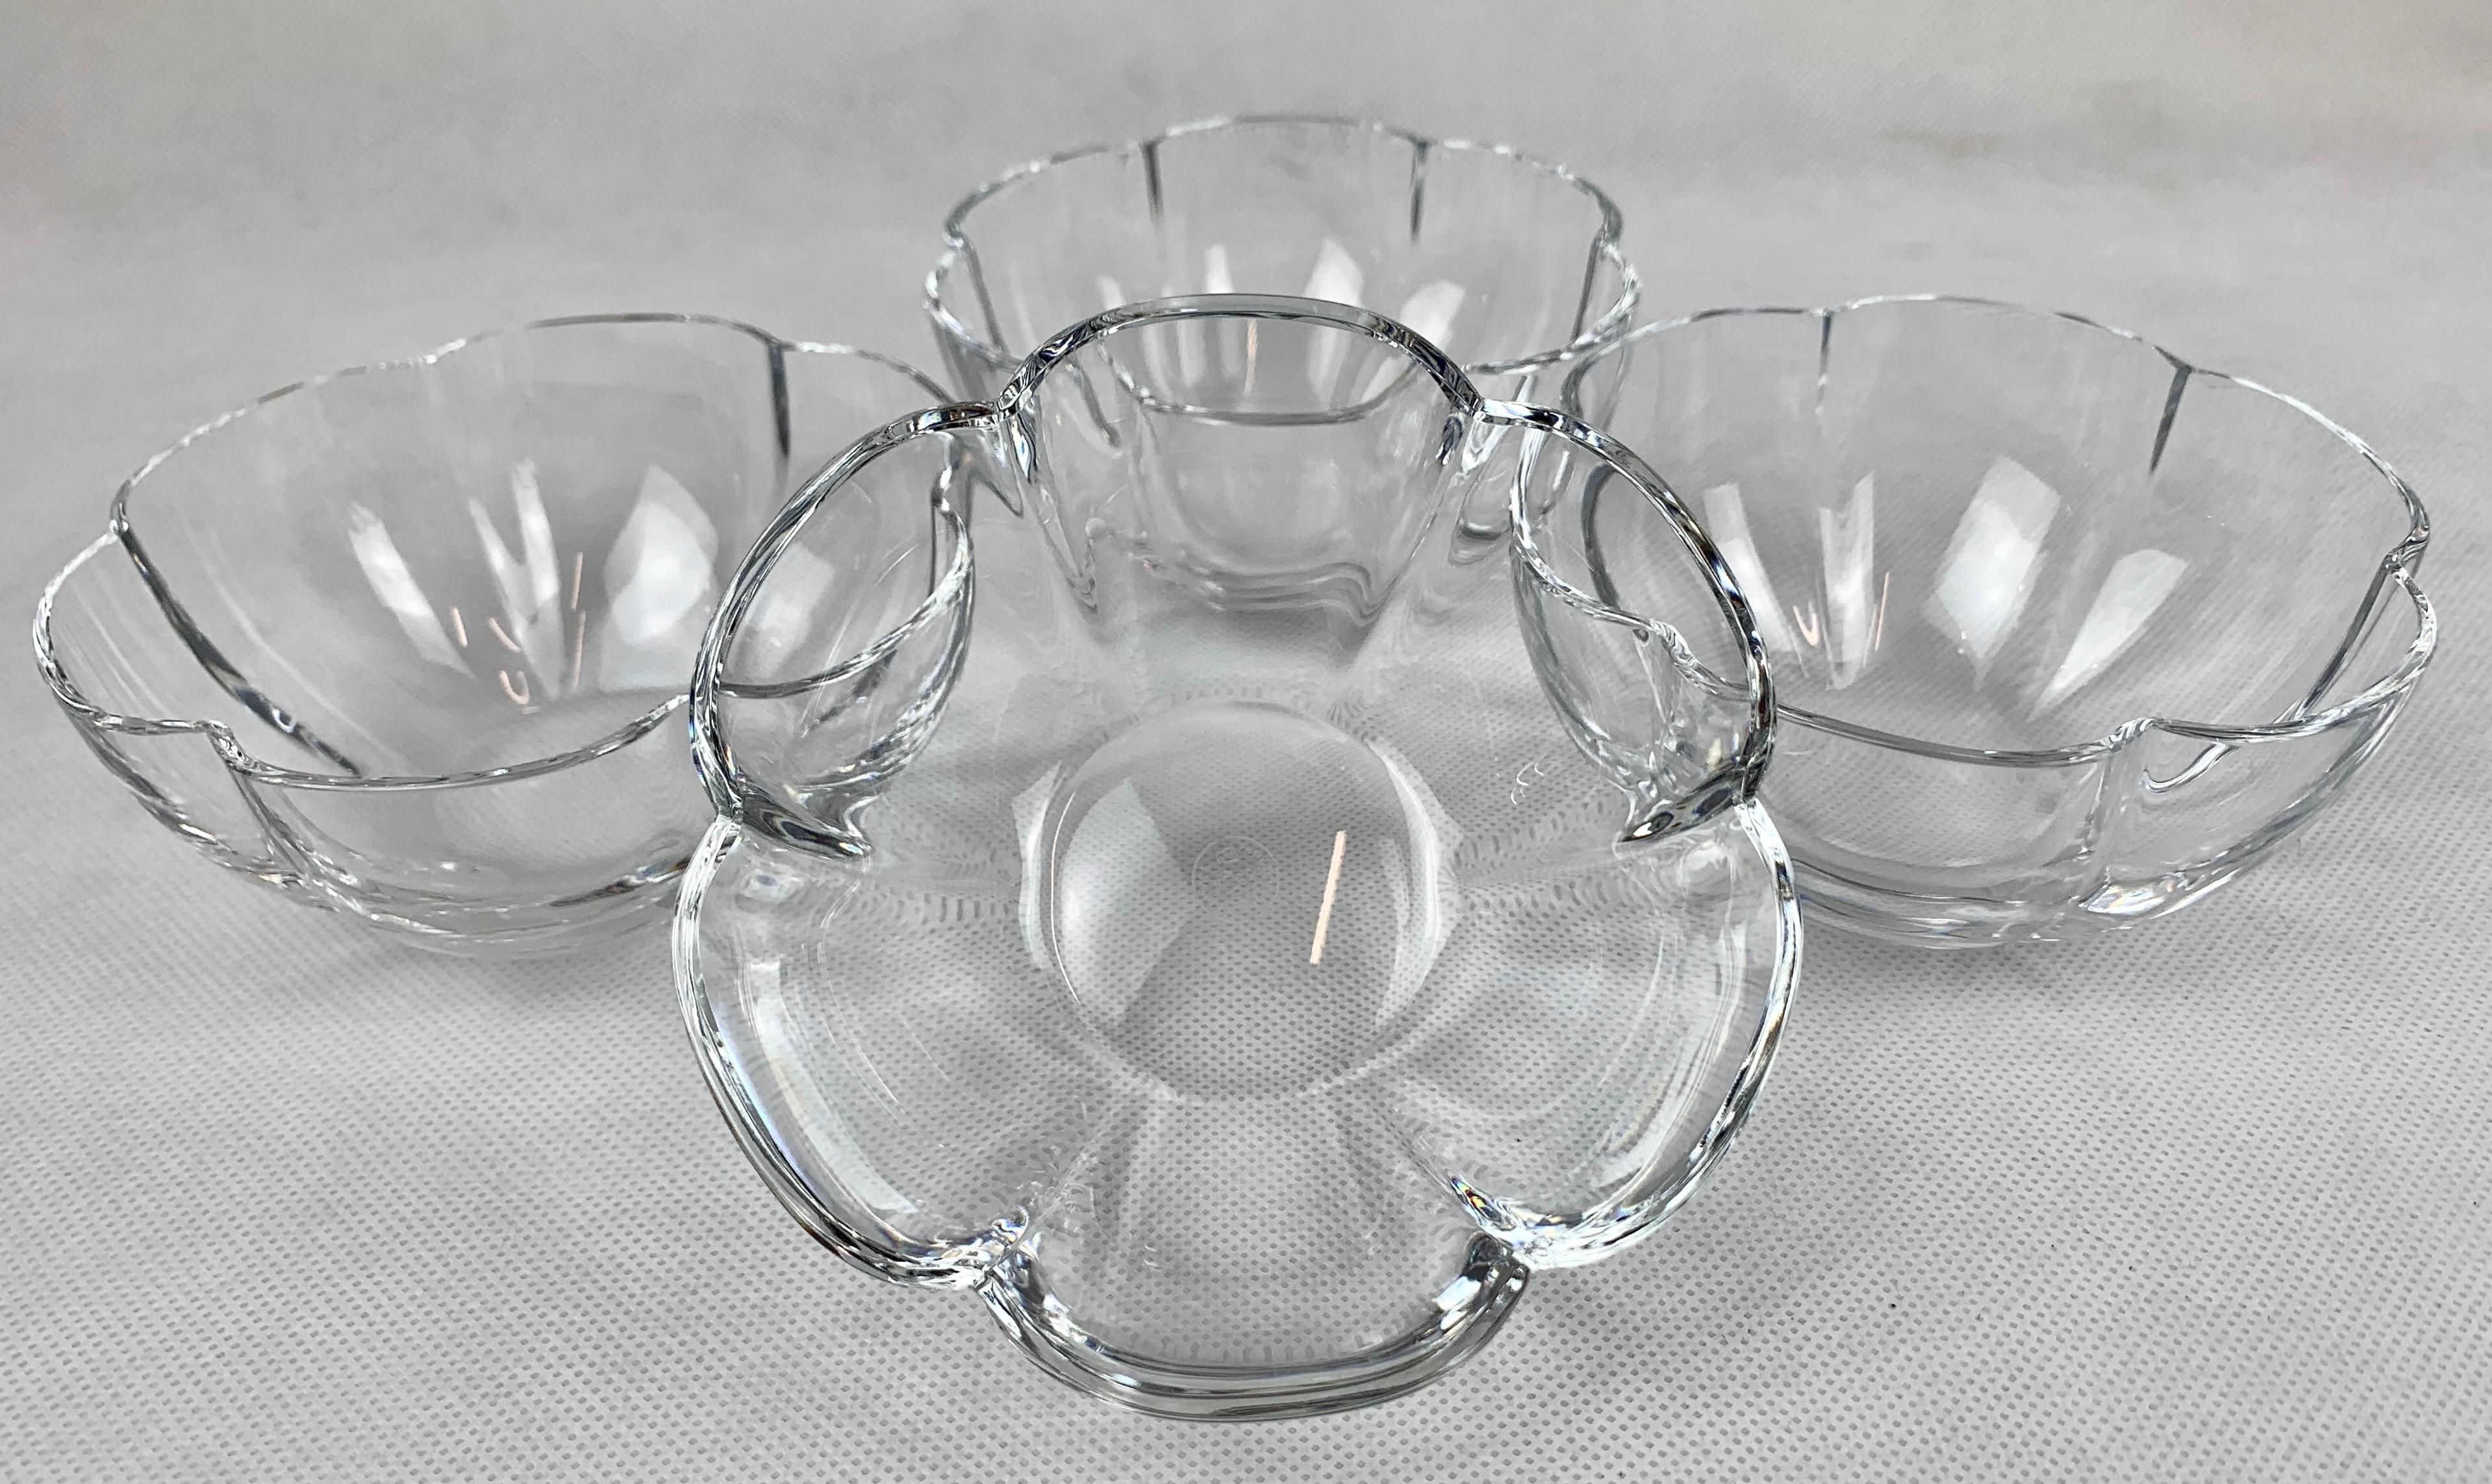 Set of four Baccarat clear crystal corail lobed melon shaped bowls. These would be ideal for desserts or chilled soup. They are in fine condition. There are no cracks or chips. Original retail price $168 each.
Measures: Width 4.5